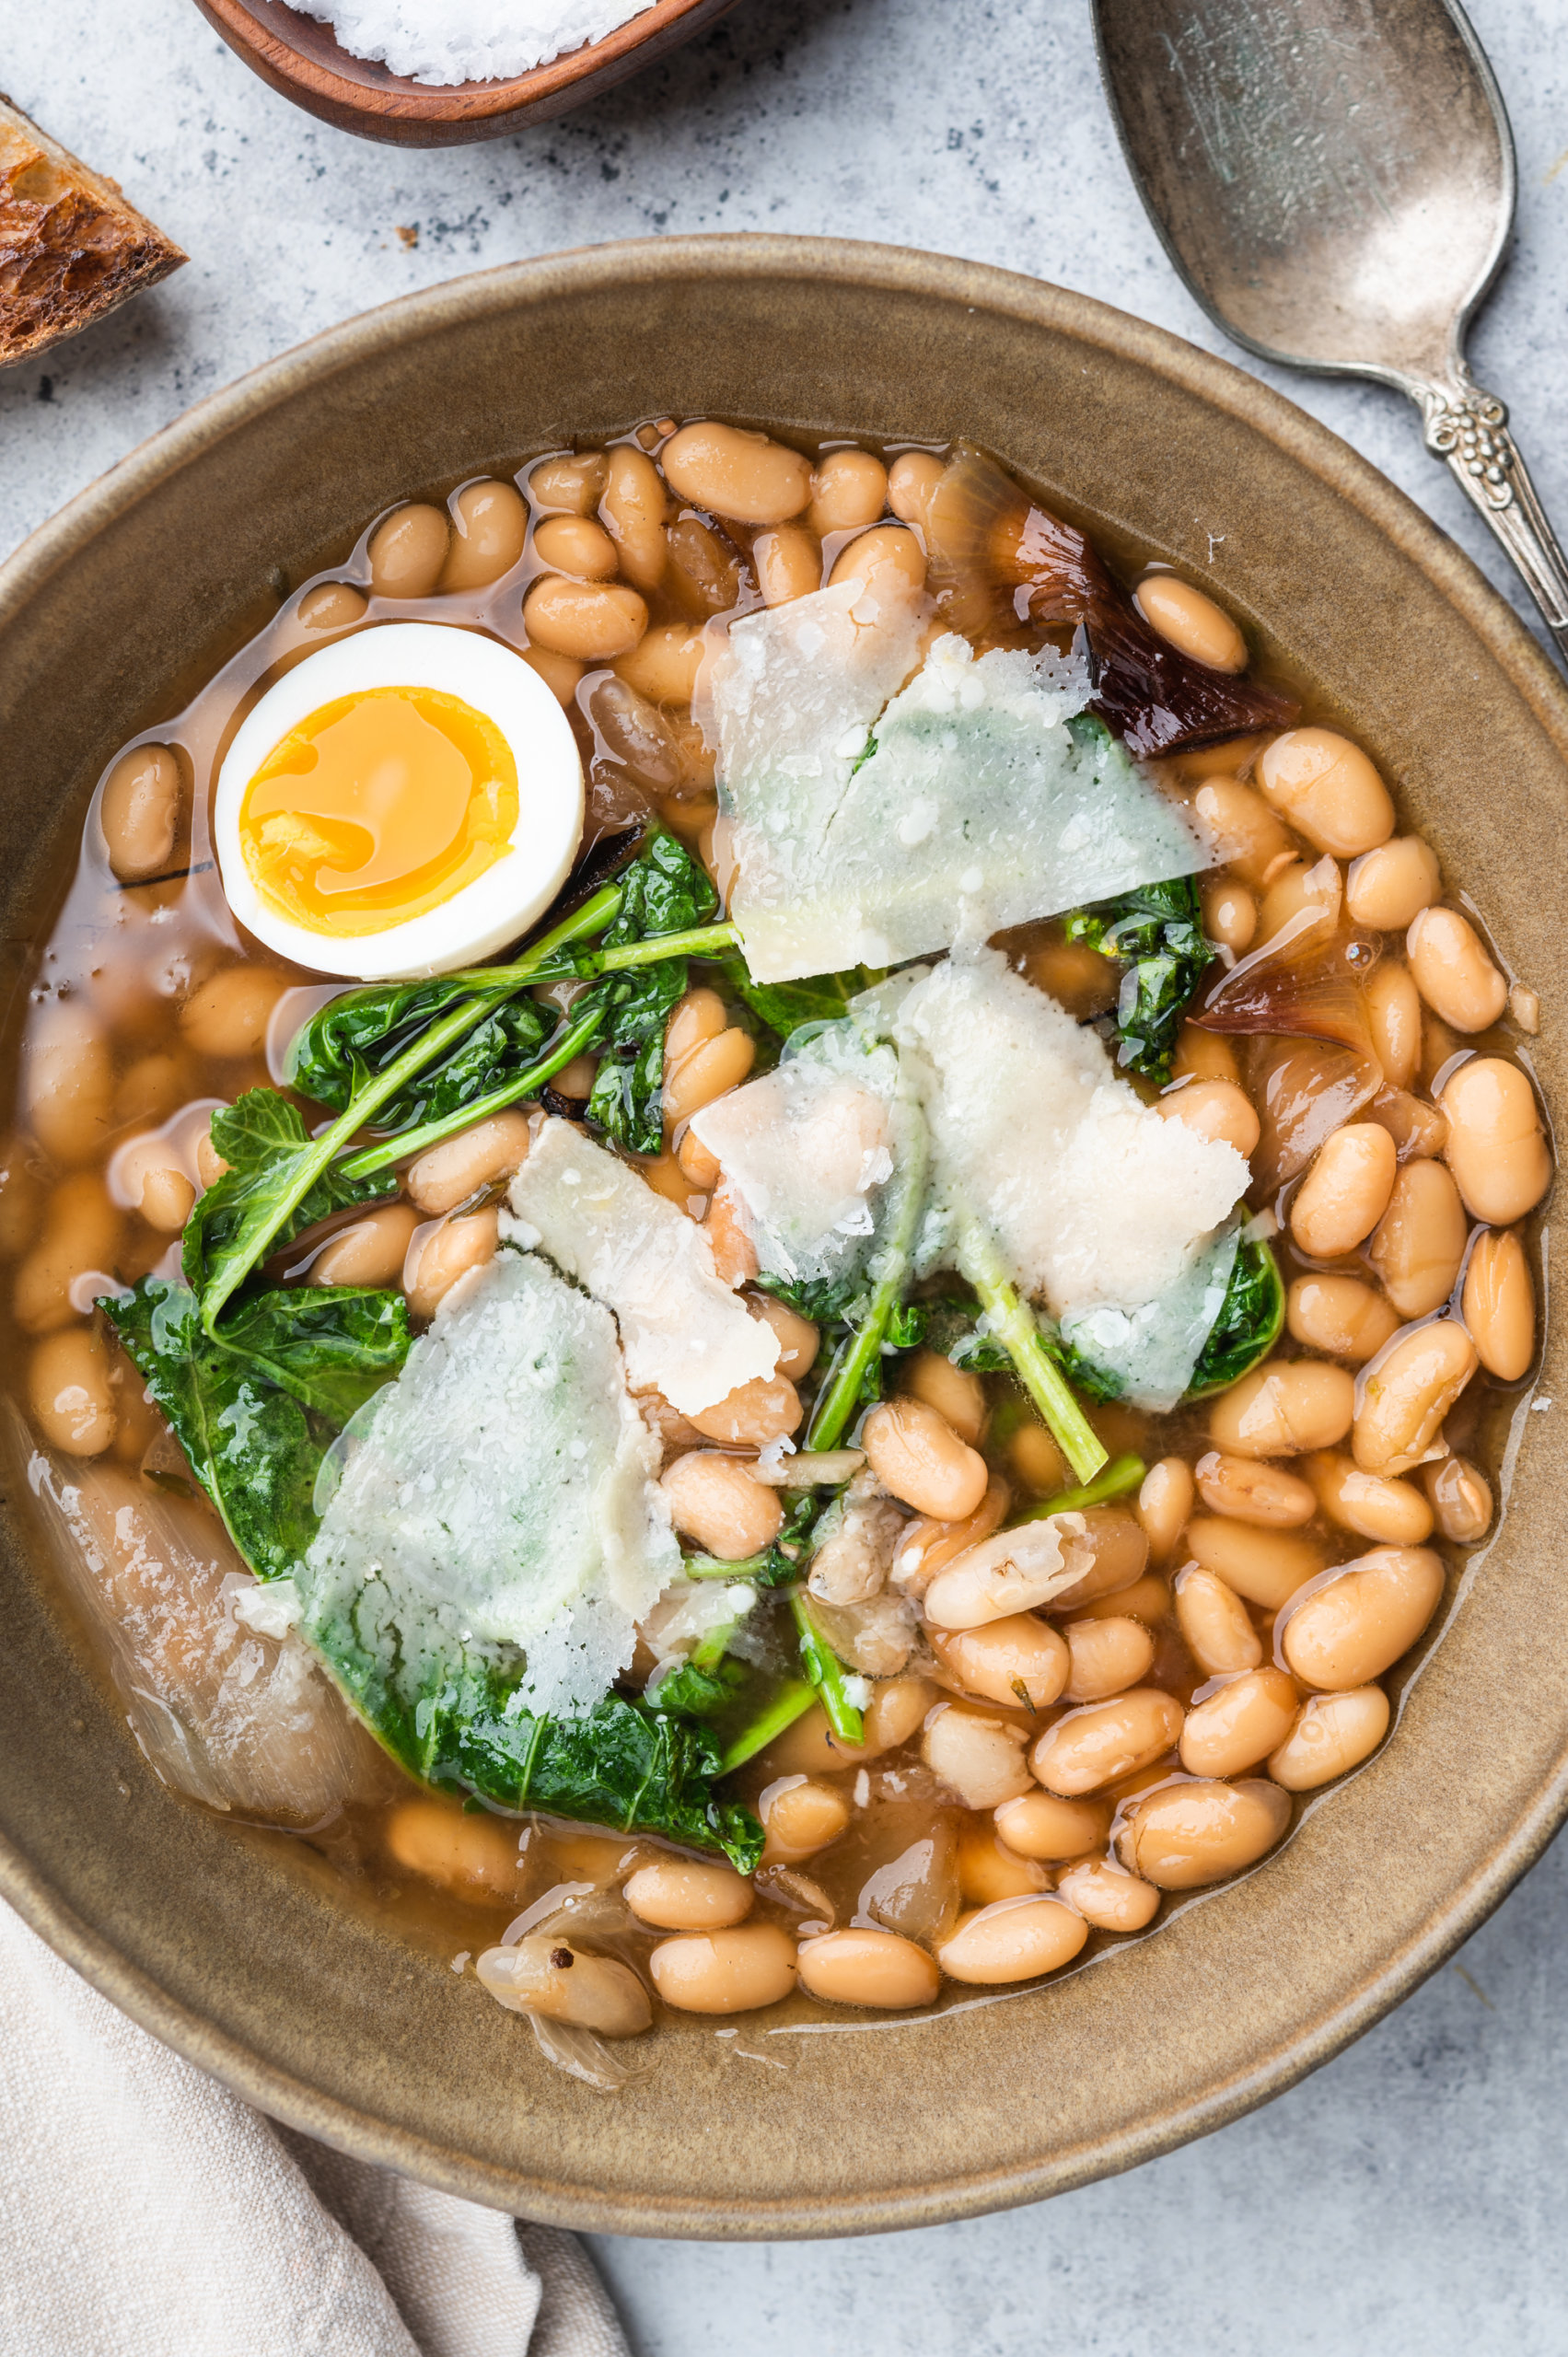 Alison Roman's recipe for brothy beans using Blue Runner great northerns